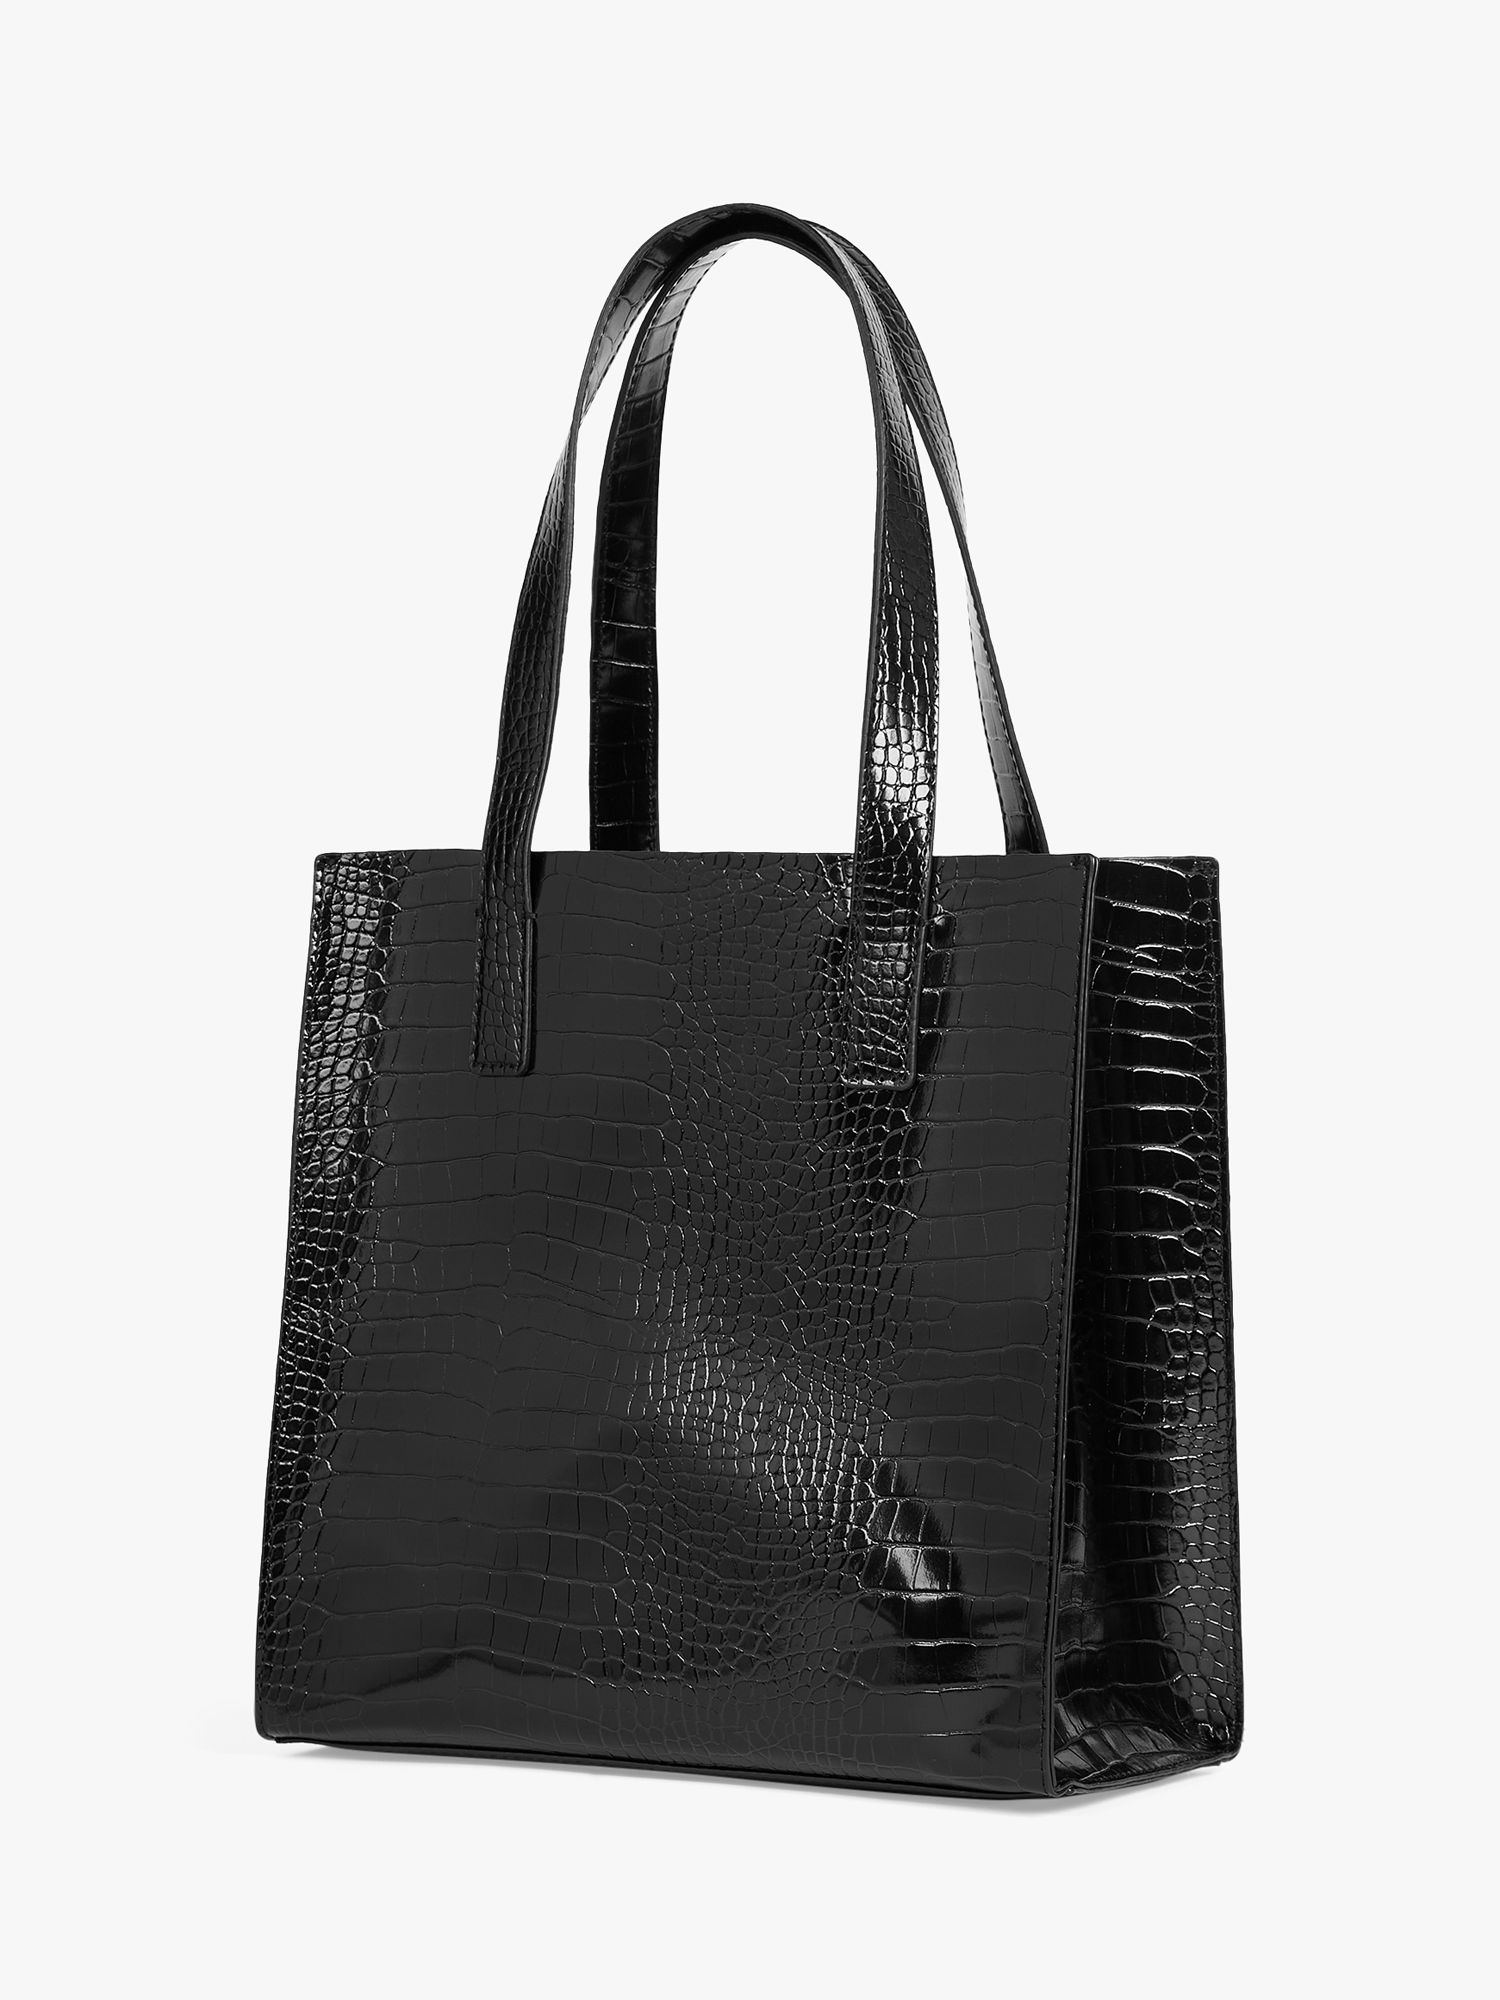 Ted Baker Reptcon Croc Effect Small Icon Tote Bag, Black, One Size